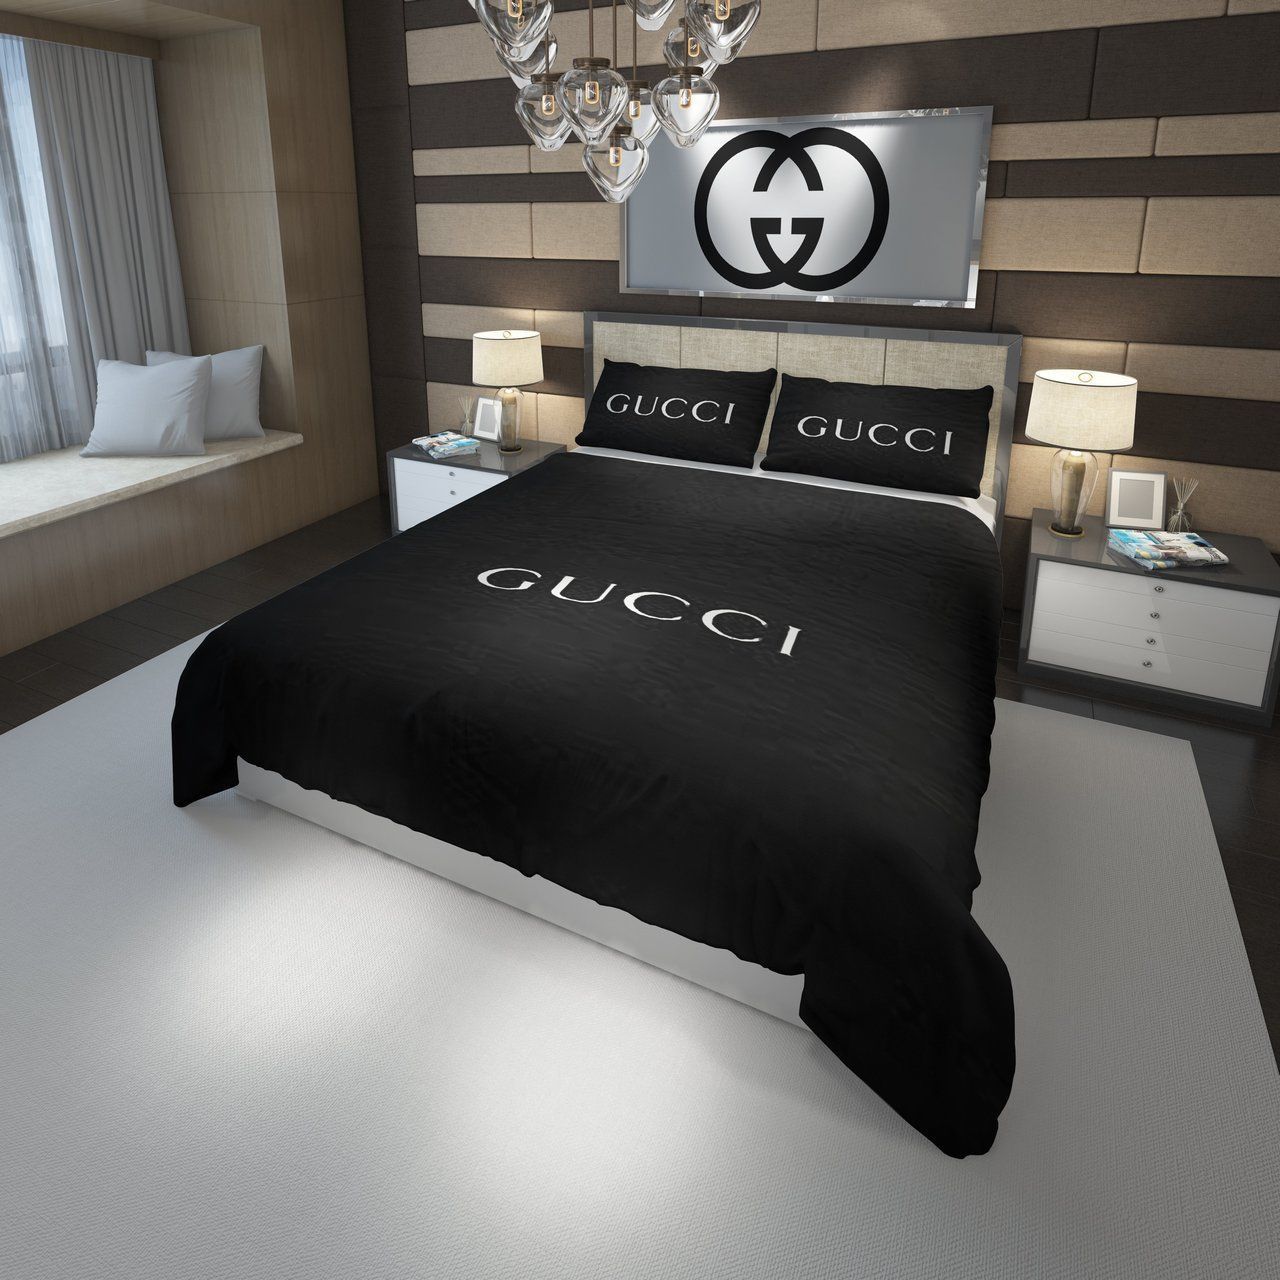 Let me show you about some luxury brand bedding set 2022 31